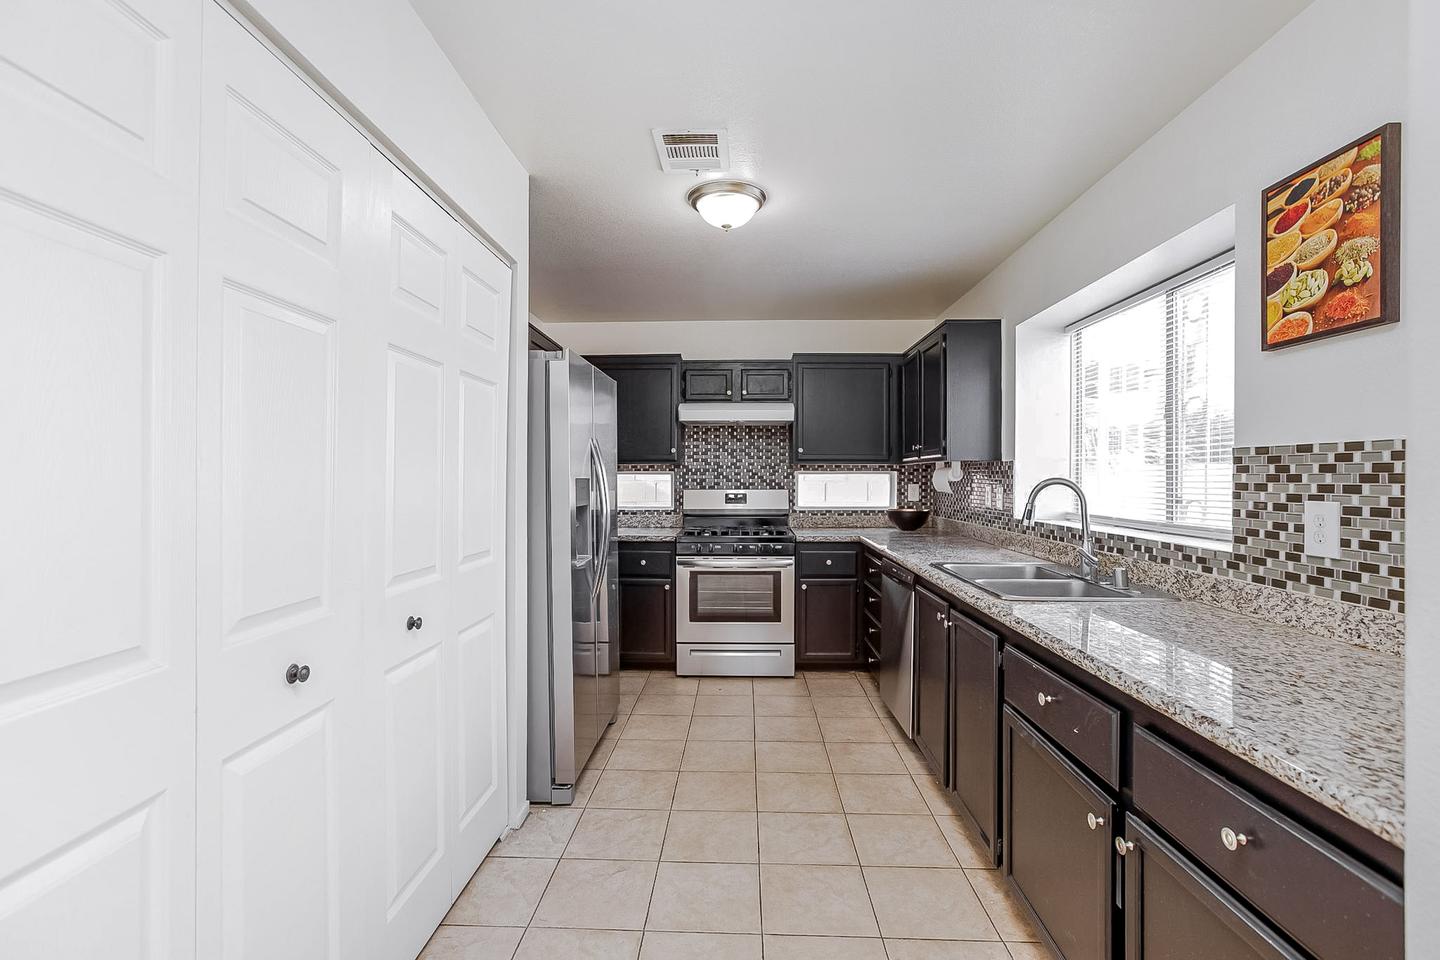 Remodeled Kitchen with Granite Countertops, Tile Backsplash and brand new appliances and a HUGE pantry